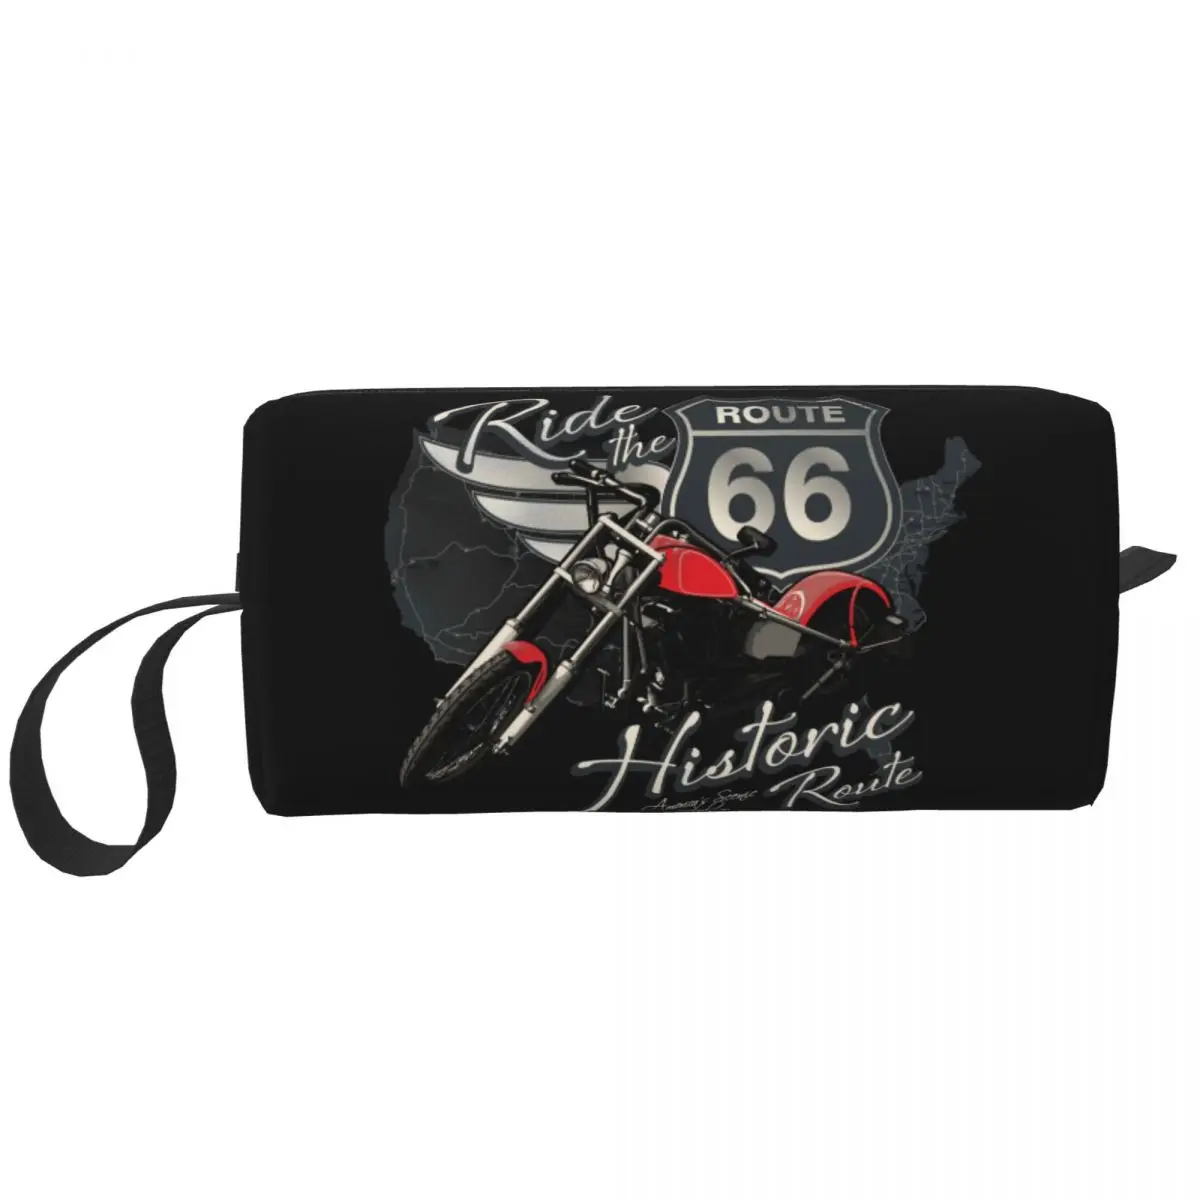 

Travel Motorcycle Ride Route 66 Travel Toiletry Bag Women US Numbered Highways Makeup Cosmetic Organizer Beauty Storage Dopp Kit